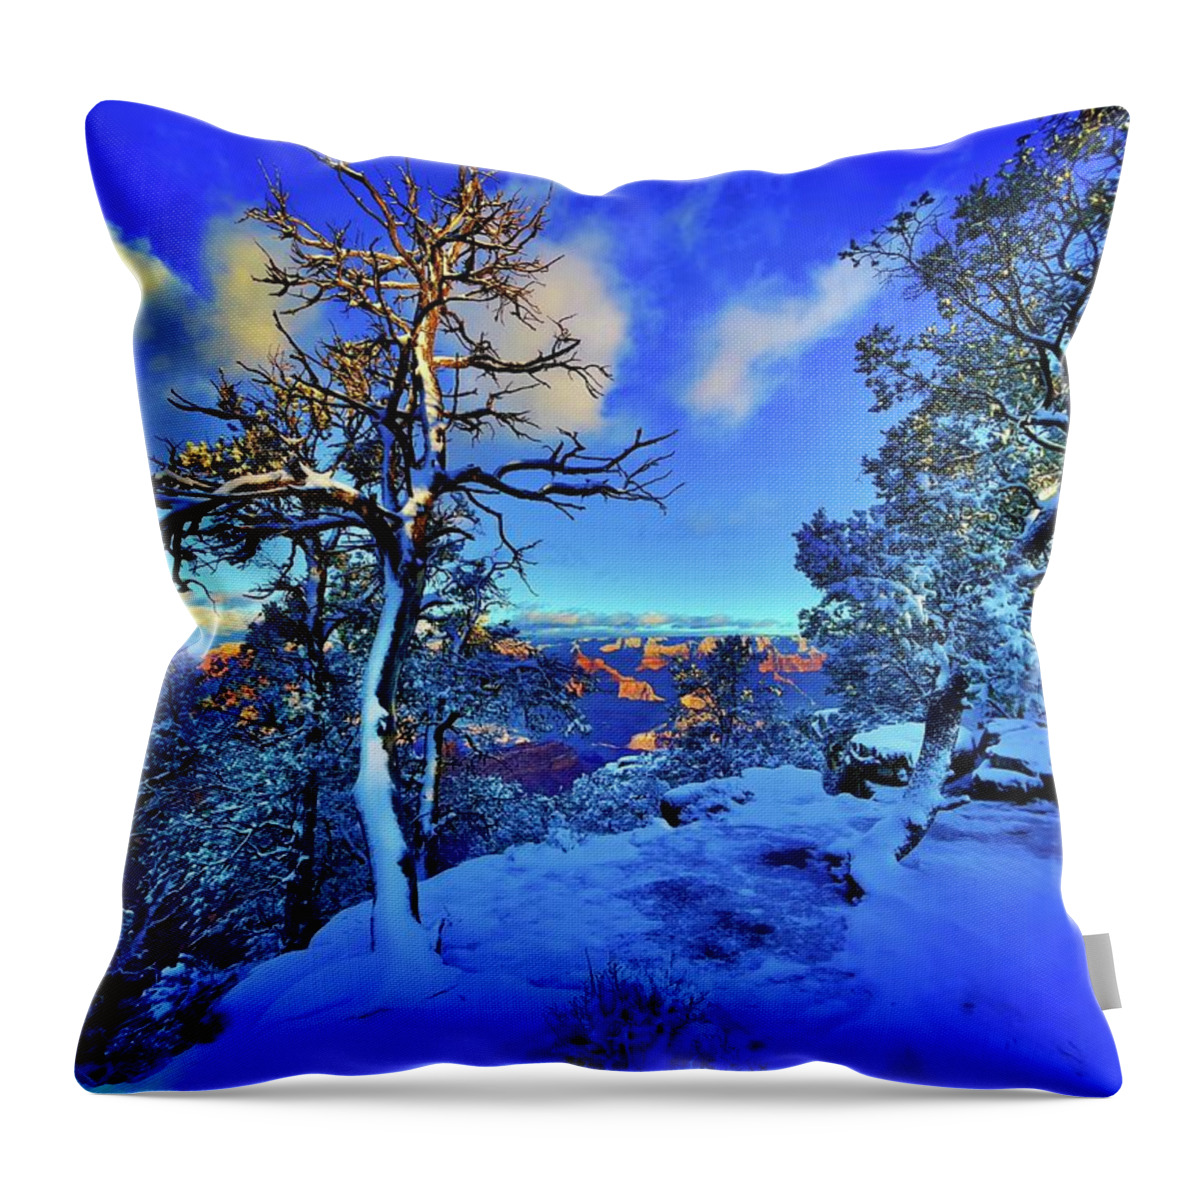 Landscape Throw Pillow featuring the photograph Just Beyond The Pines by Kevyn Bashore